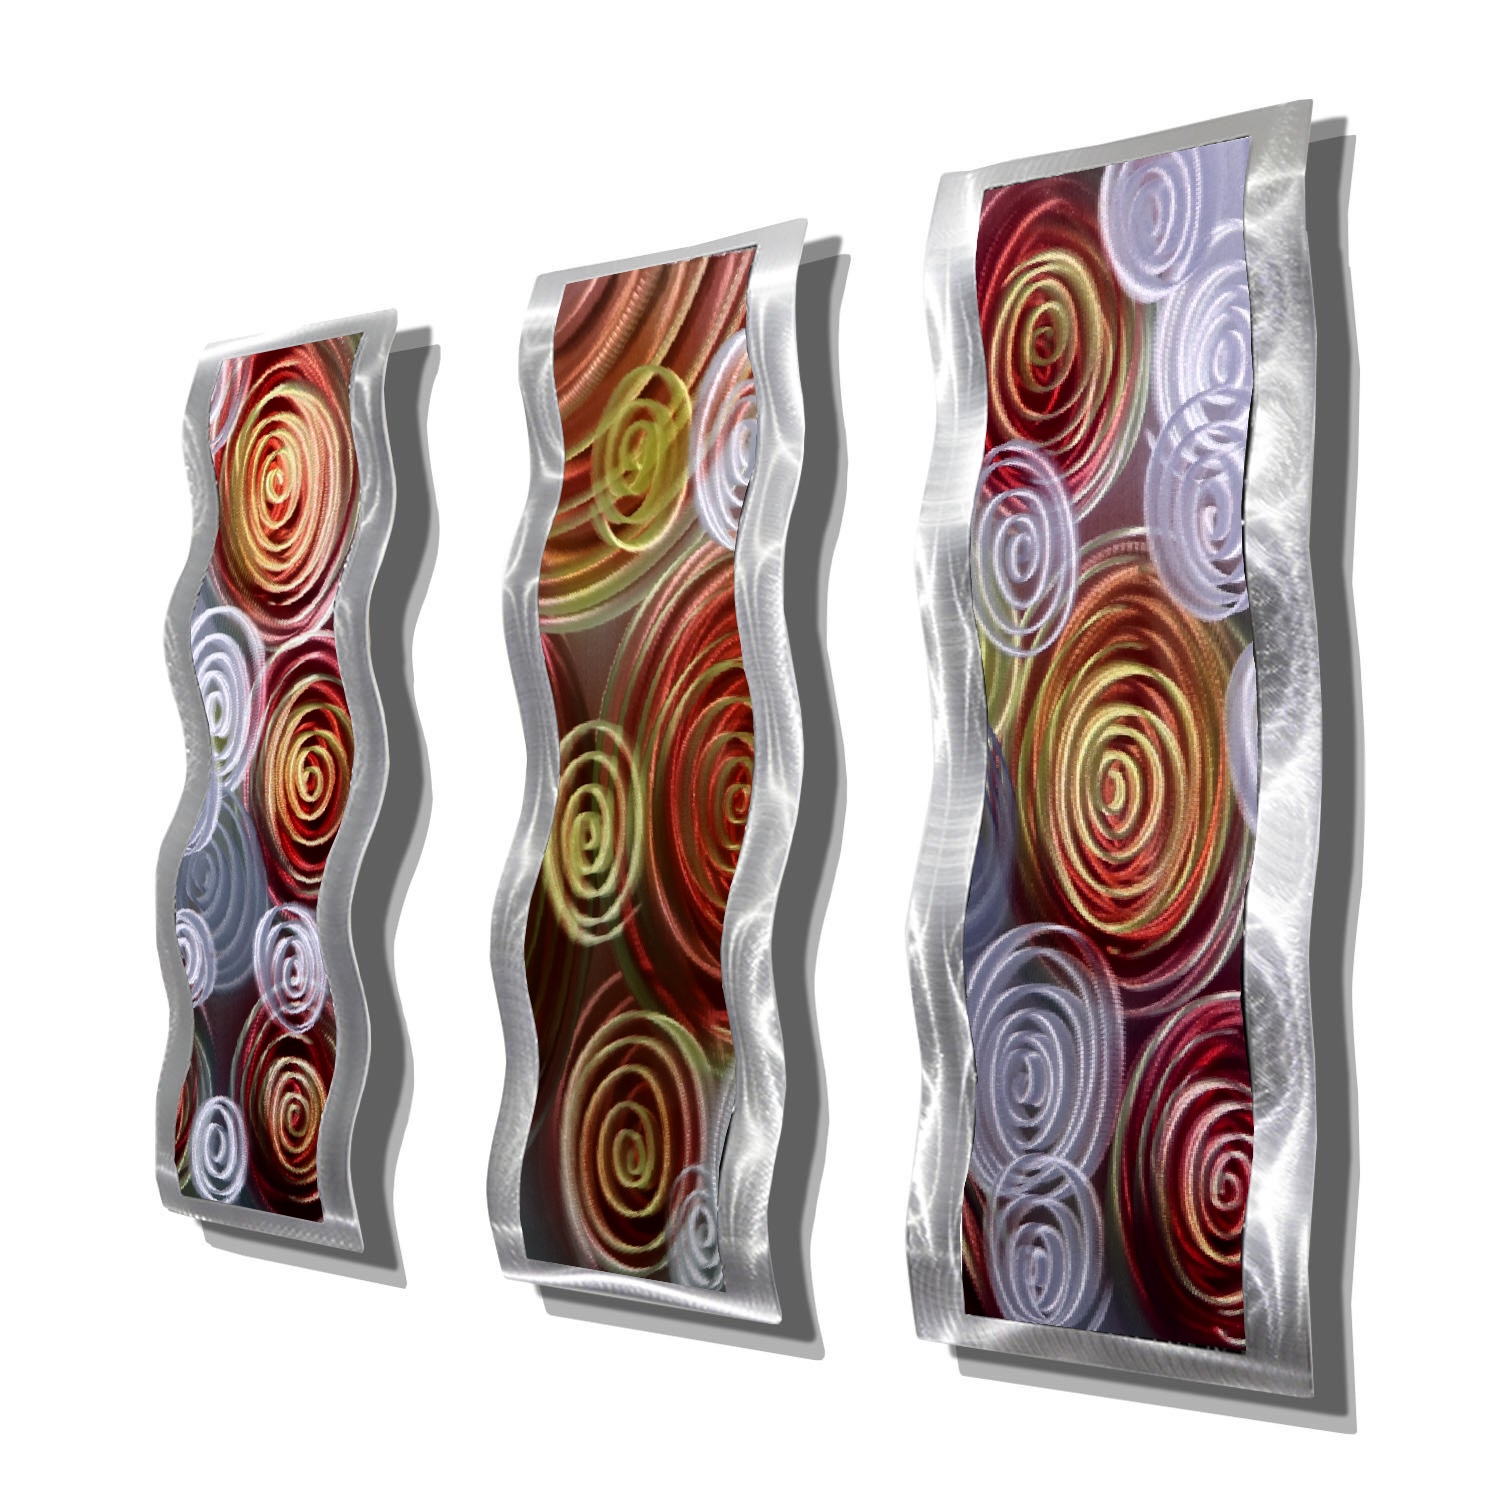 3D metal decorative curve wall panels modern arts interior home crafts wholesale from China factory